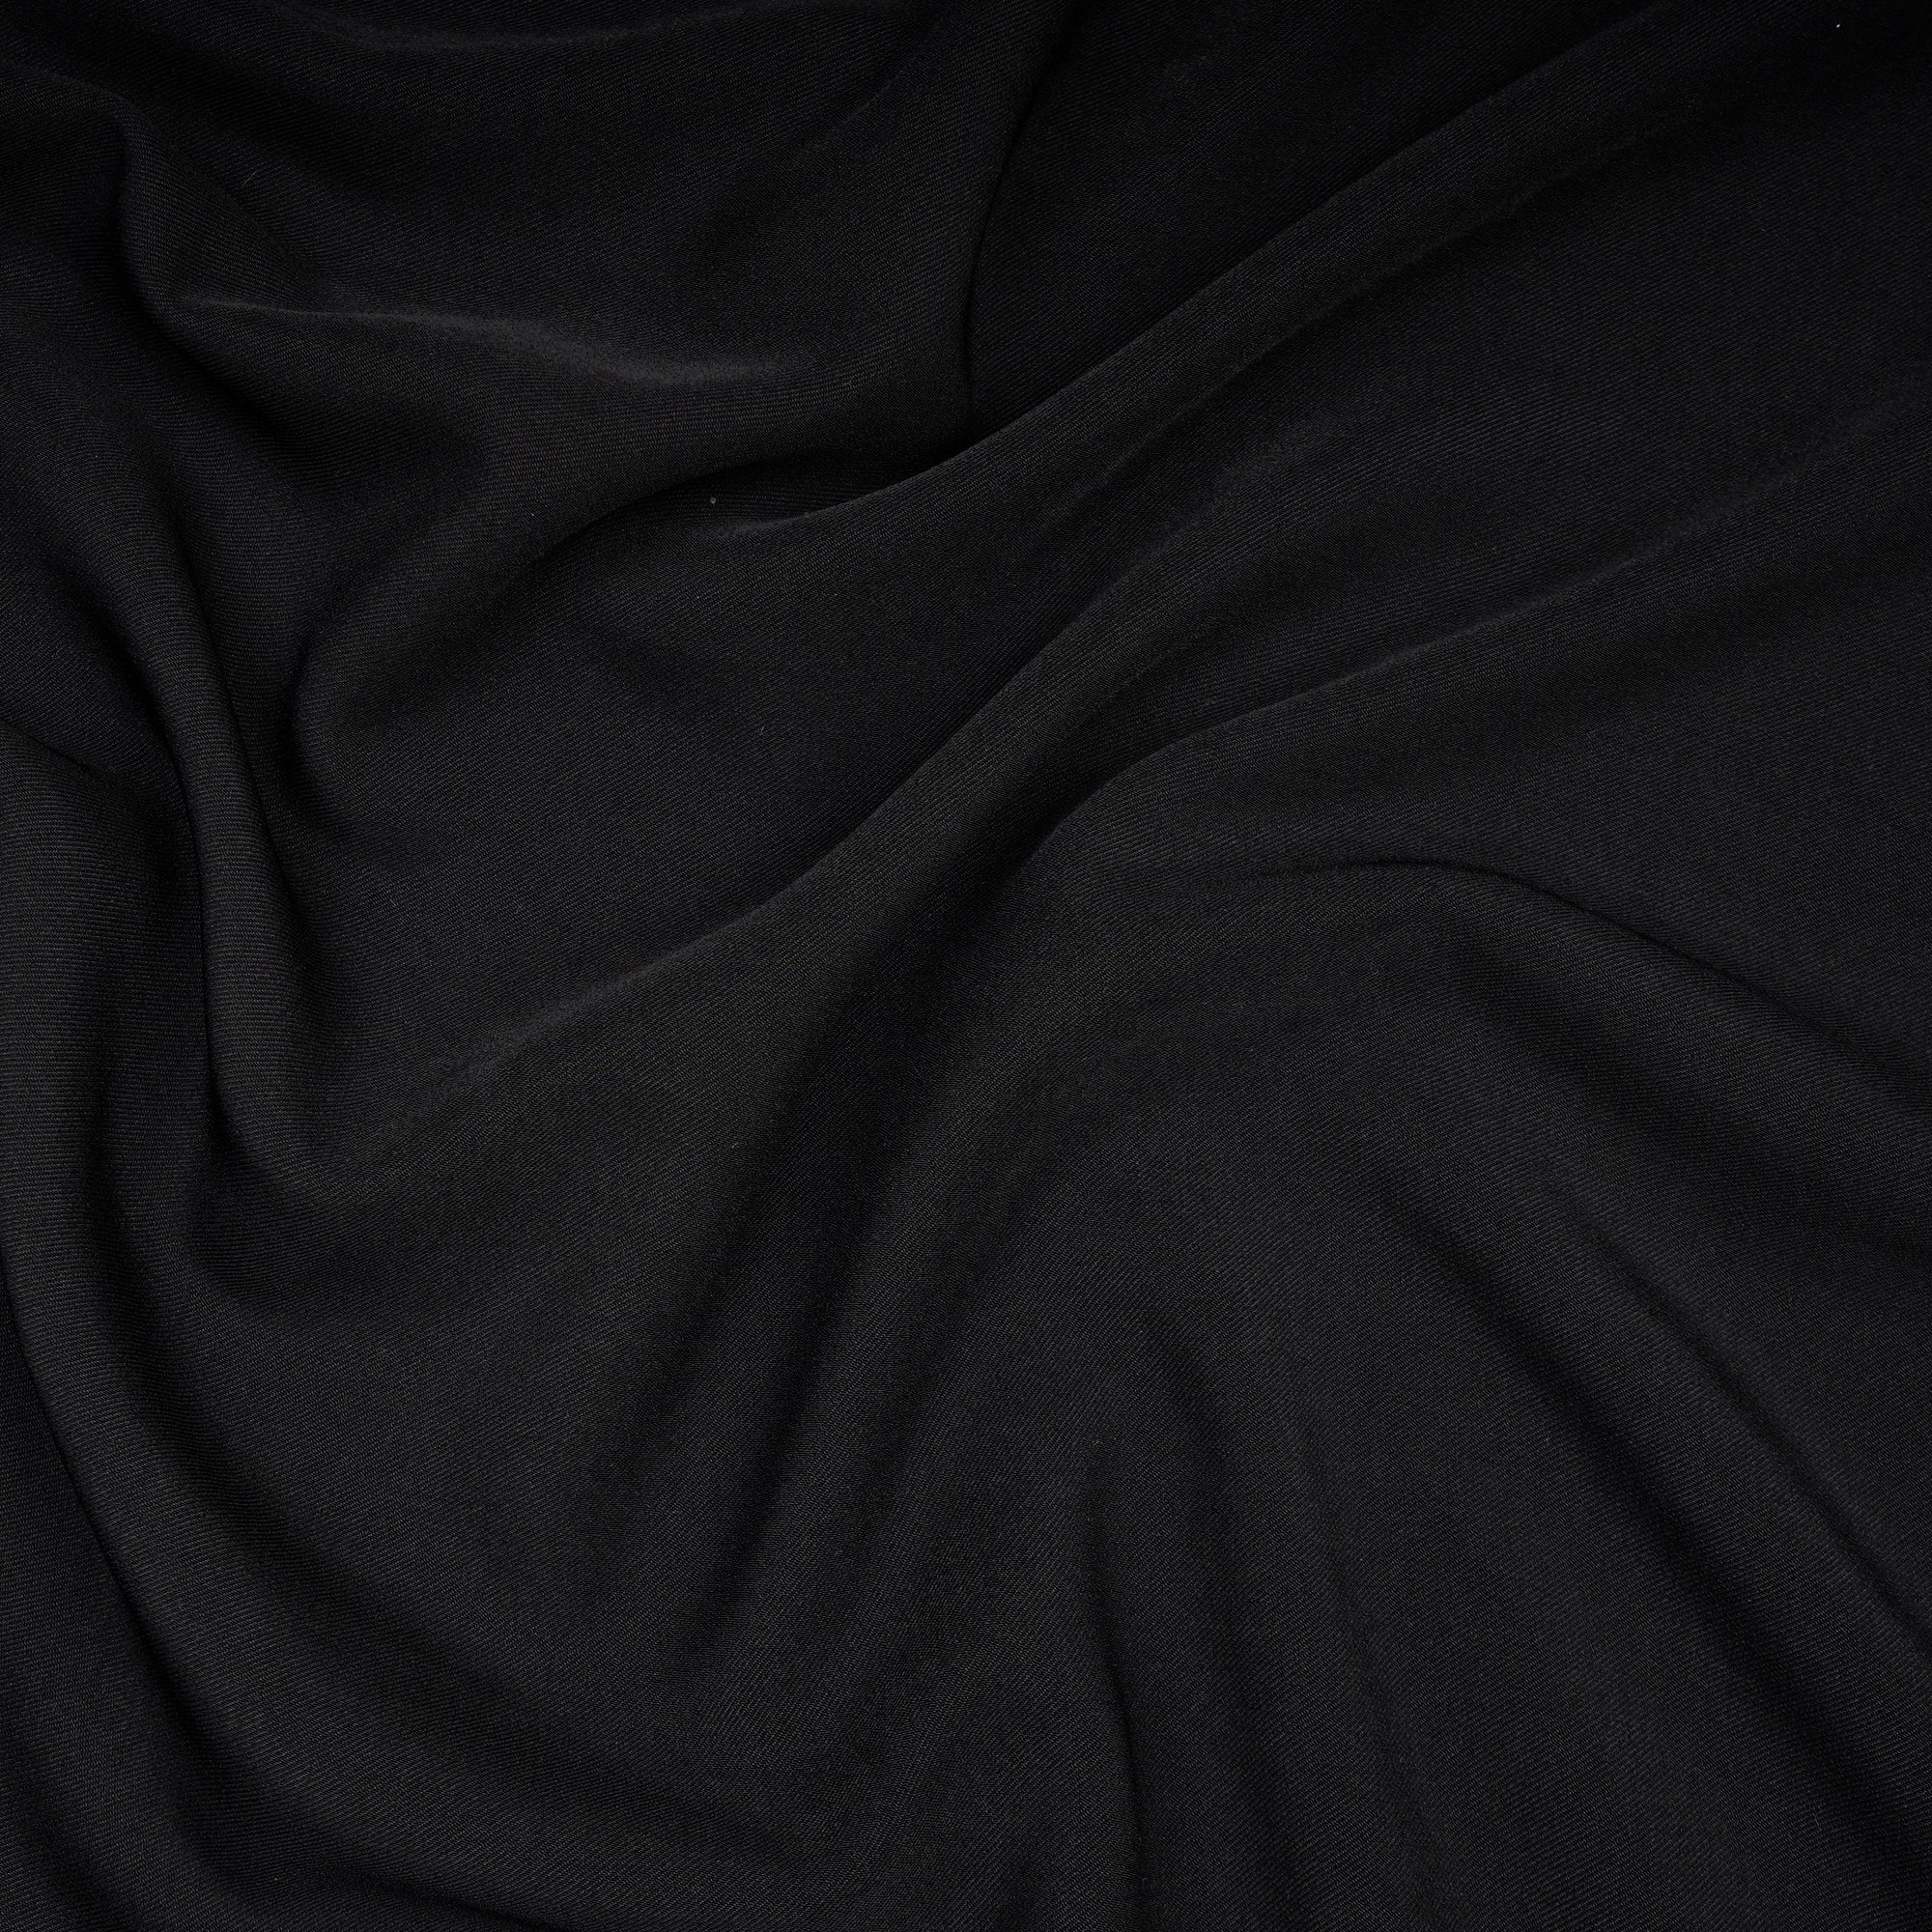 Jet Black Solid Dyed Imported British Twill Fabric (60" Width)